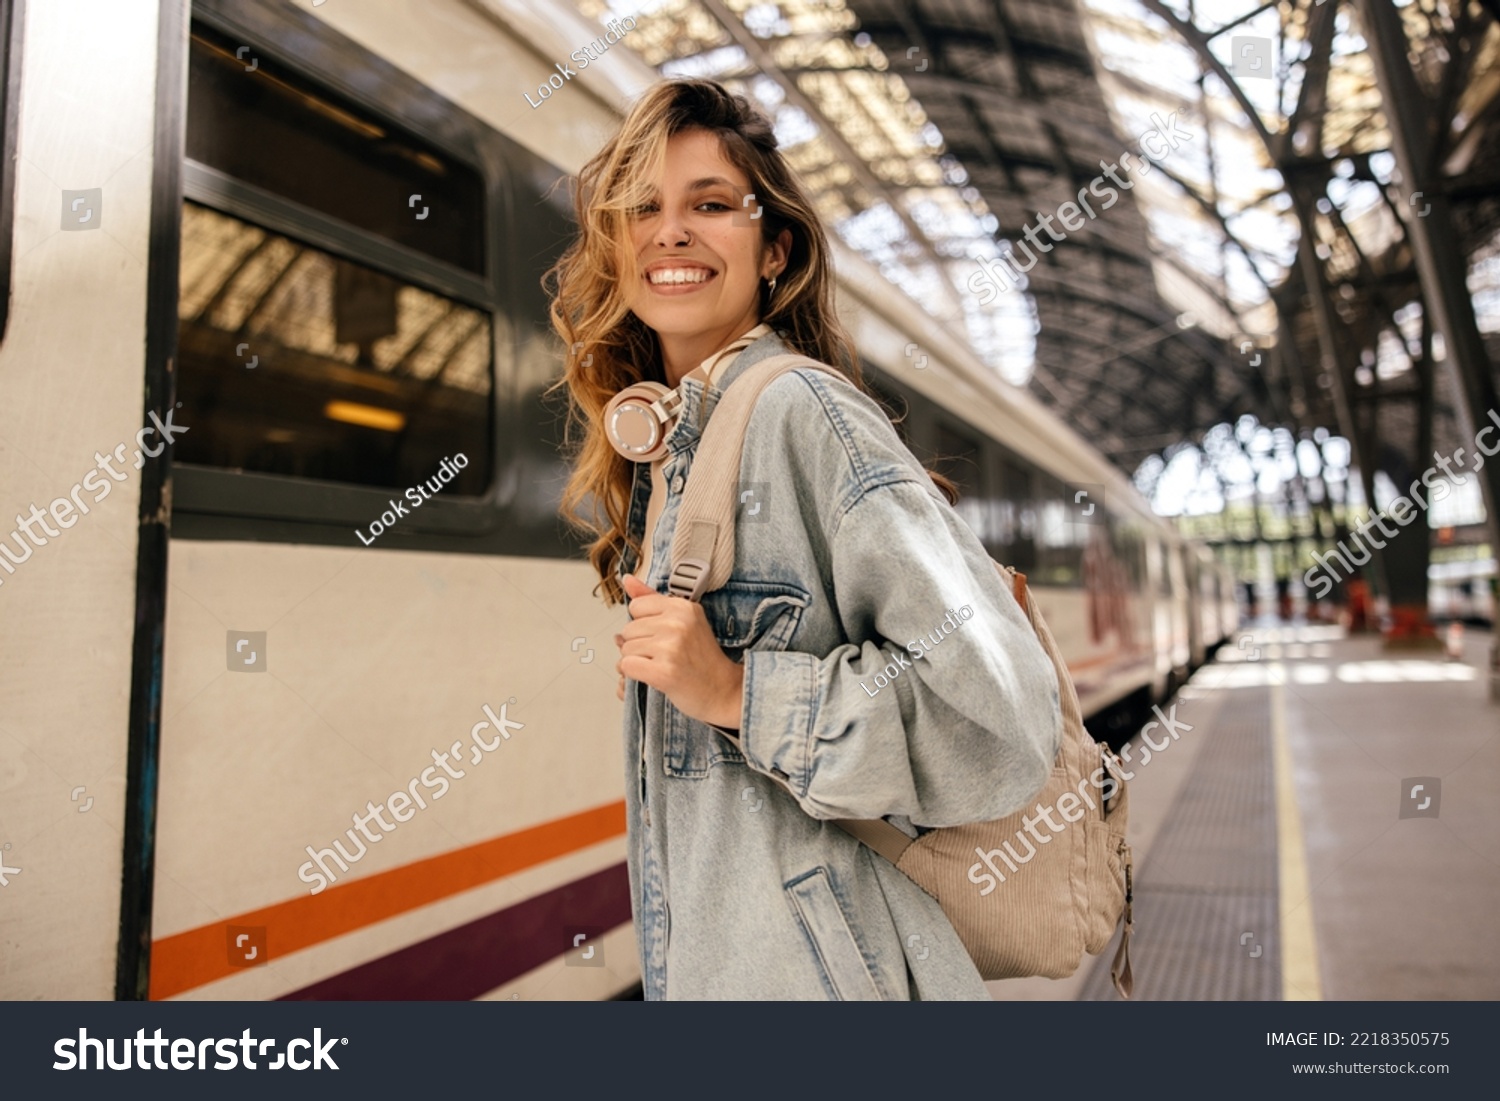 Happy young caucasian woman smiles with teeth looking at camera going on train trip. Blonde wears denim jacket, backpack. Spring break concept. #2218350575